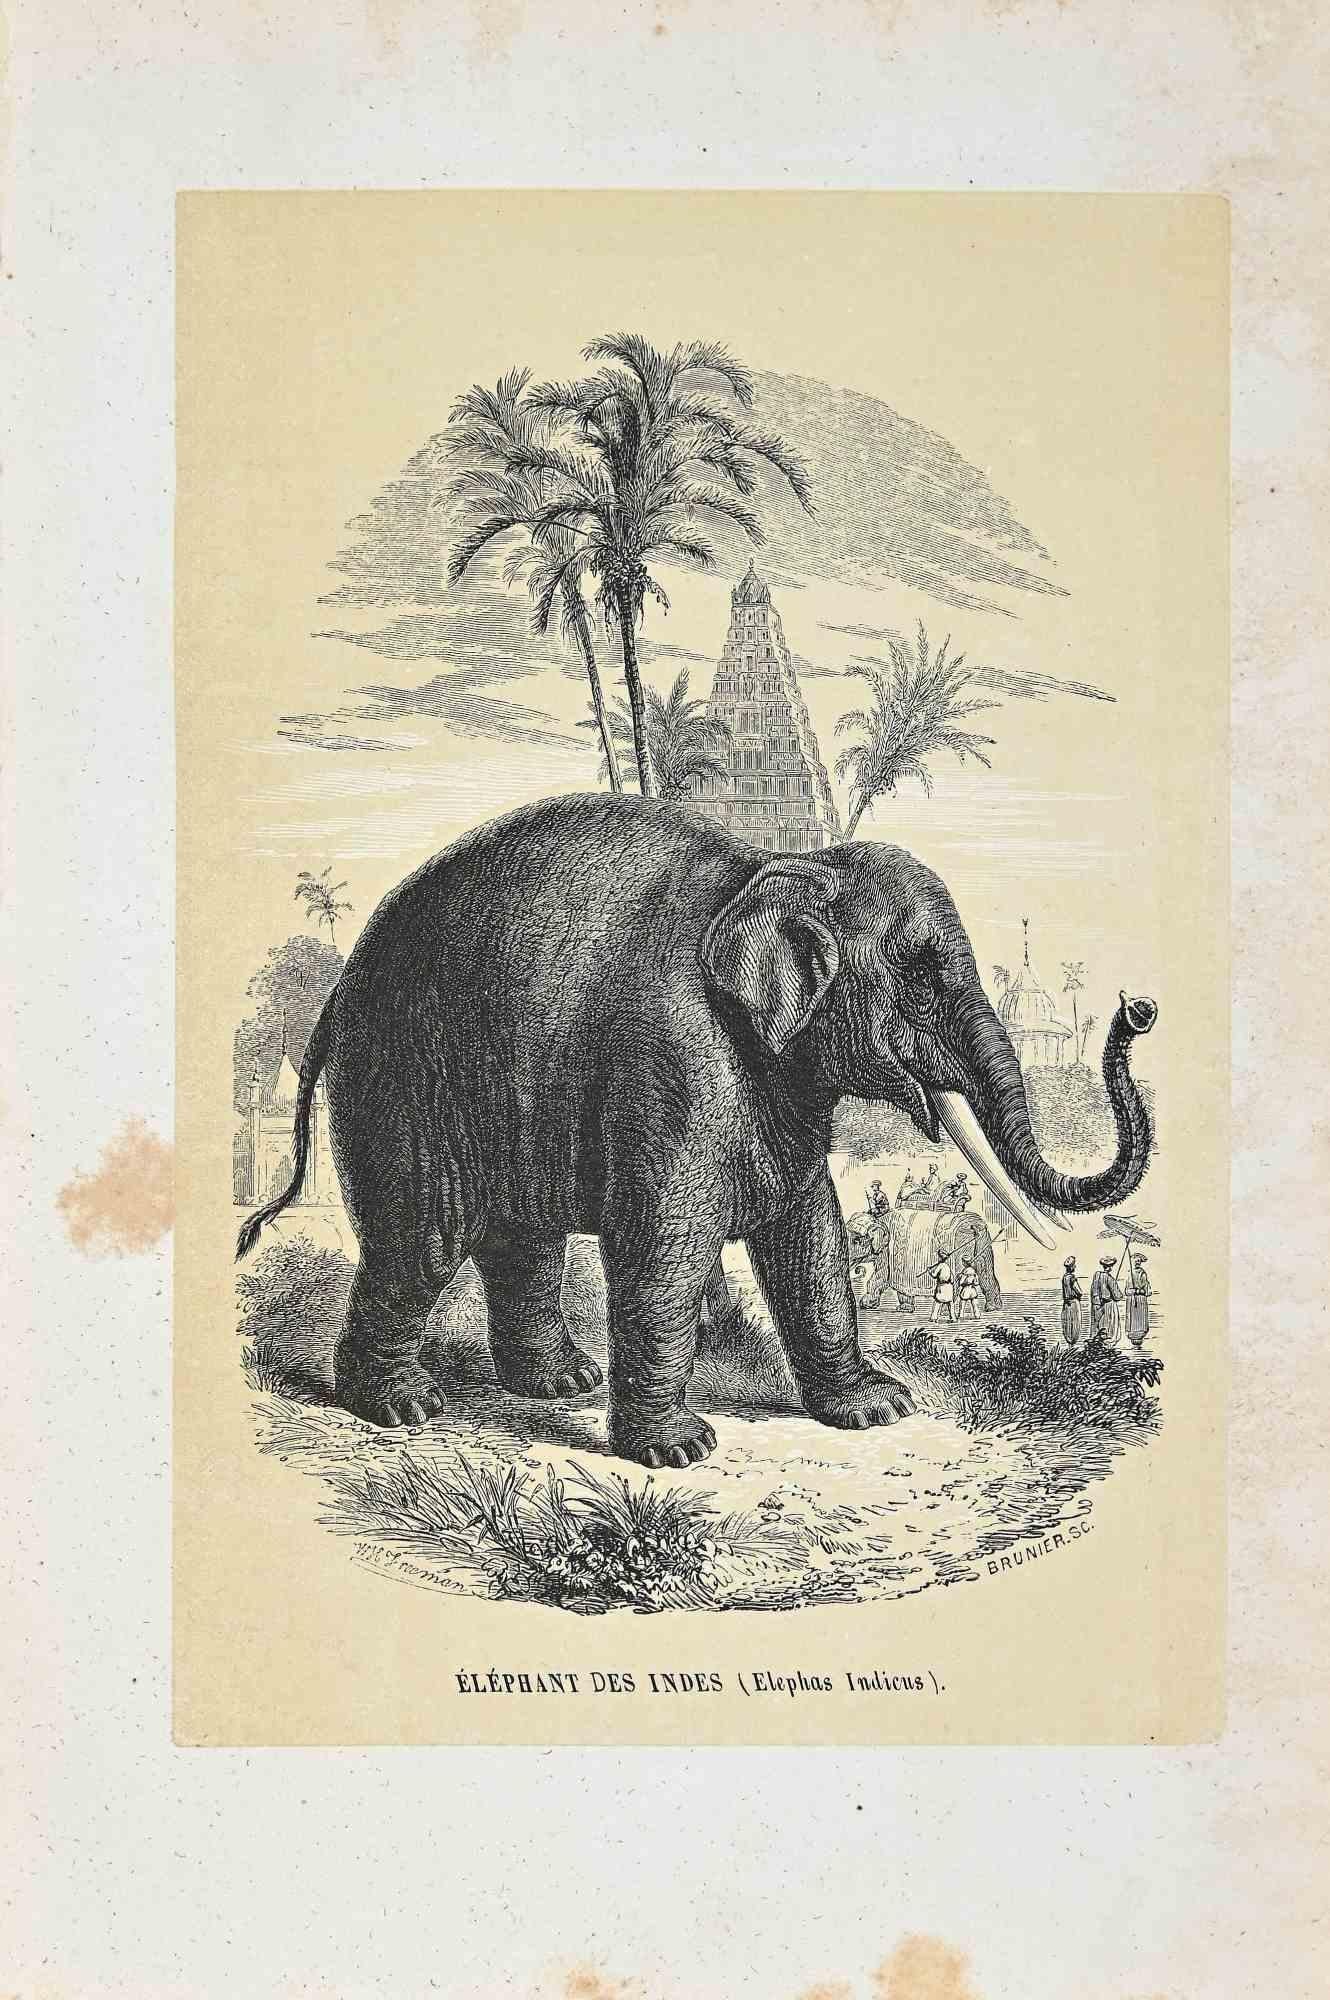 Indian Elephant is an original lithograph on ivory-colored paper, realized by Paul Gervais (1816-1879). The artwork is from The Series of "Les Trois Règnes de la Nature", and was published in 1854.

Good conditions except for some foxings.

Titled